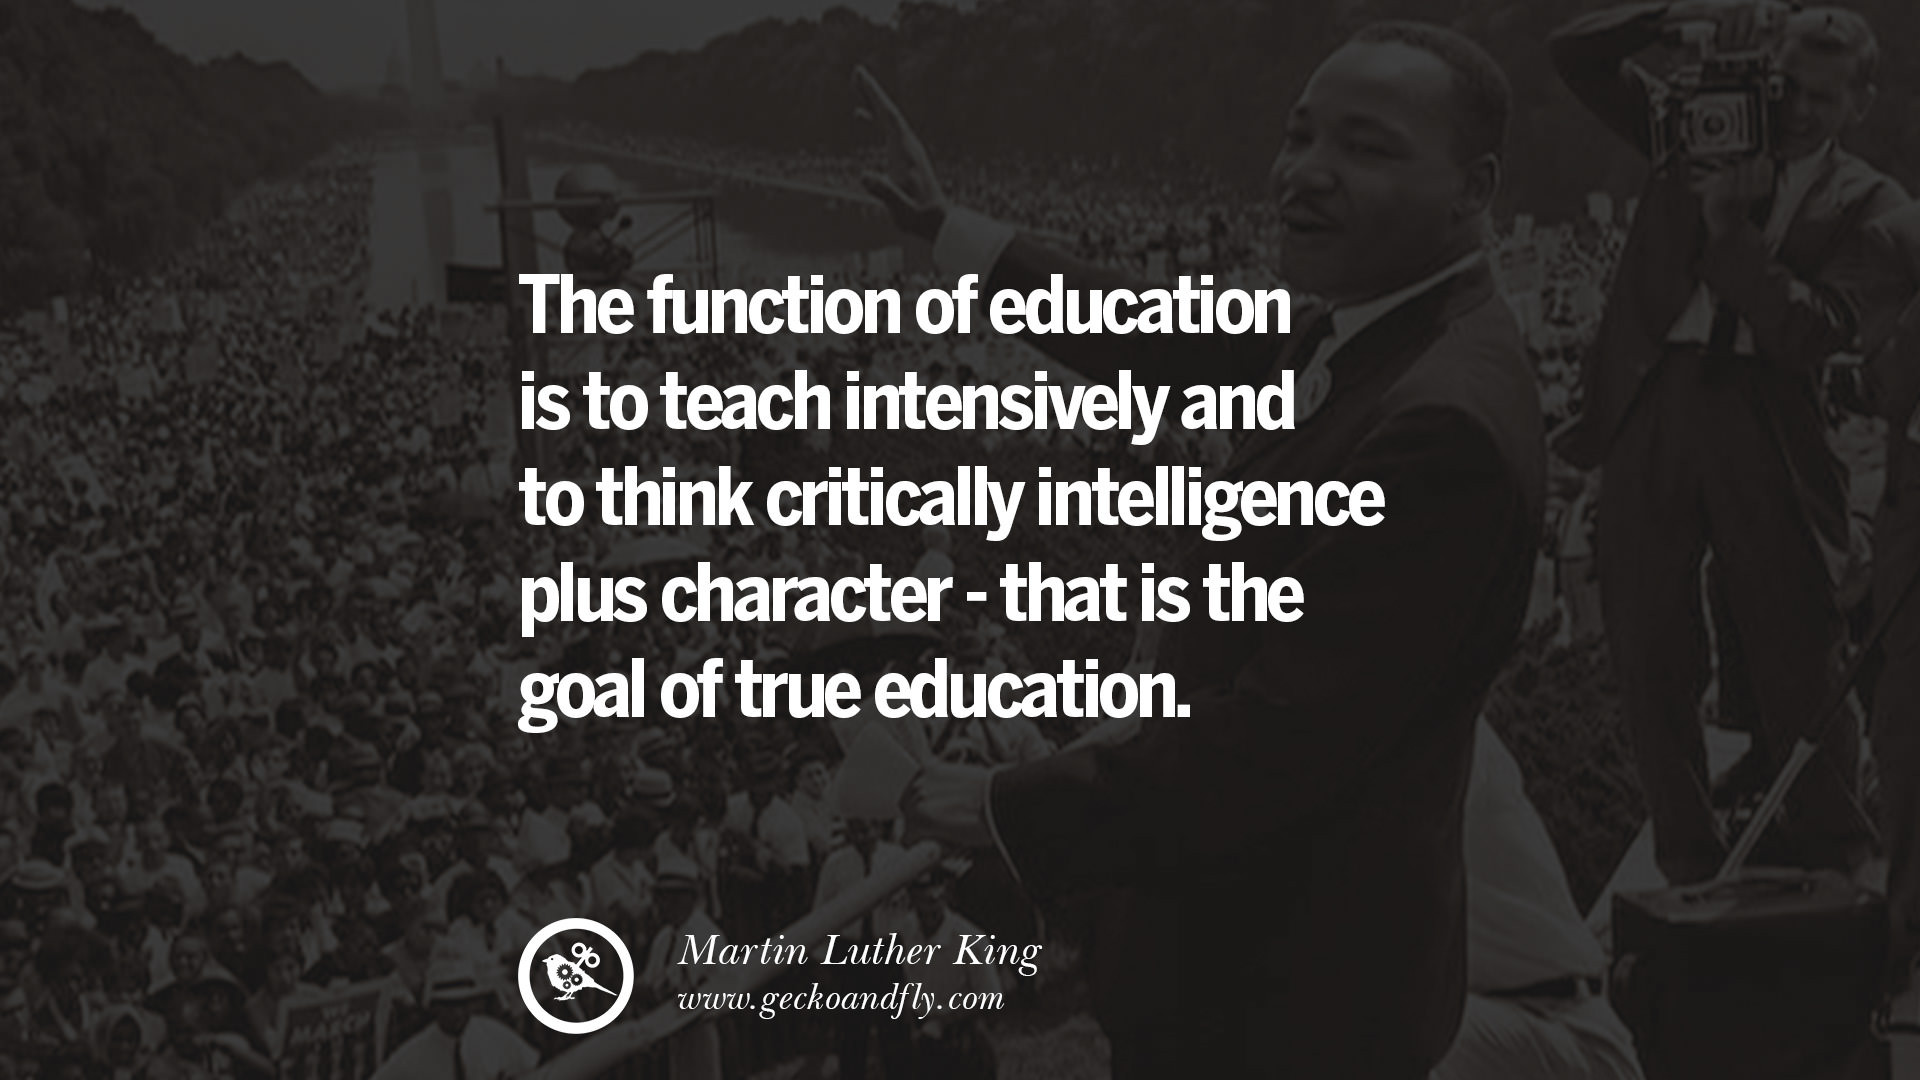 Martin Luther King Jr Quotes On Education
 30 Powerful Martin Luther King Jr Quotes on Equality